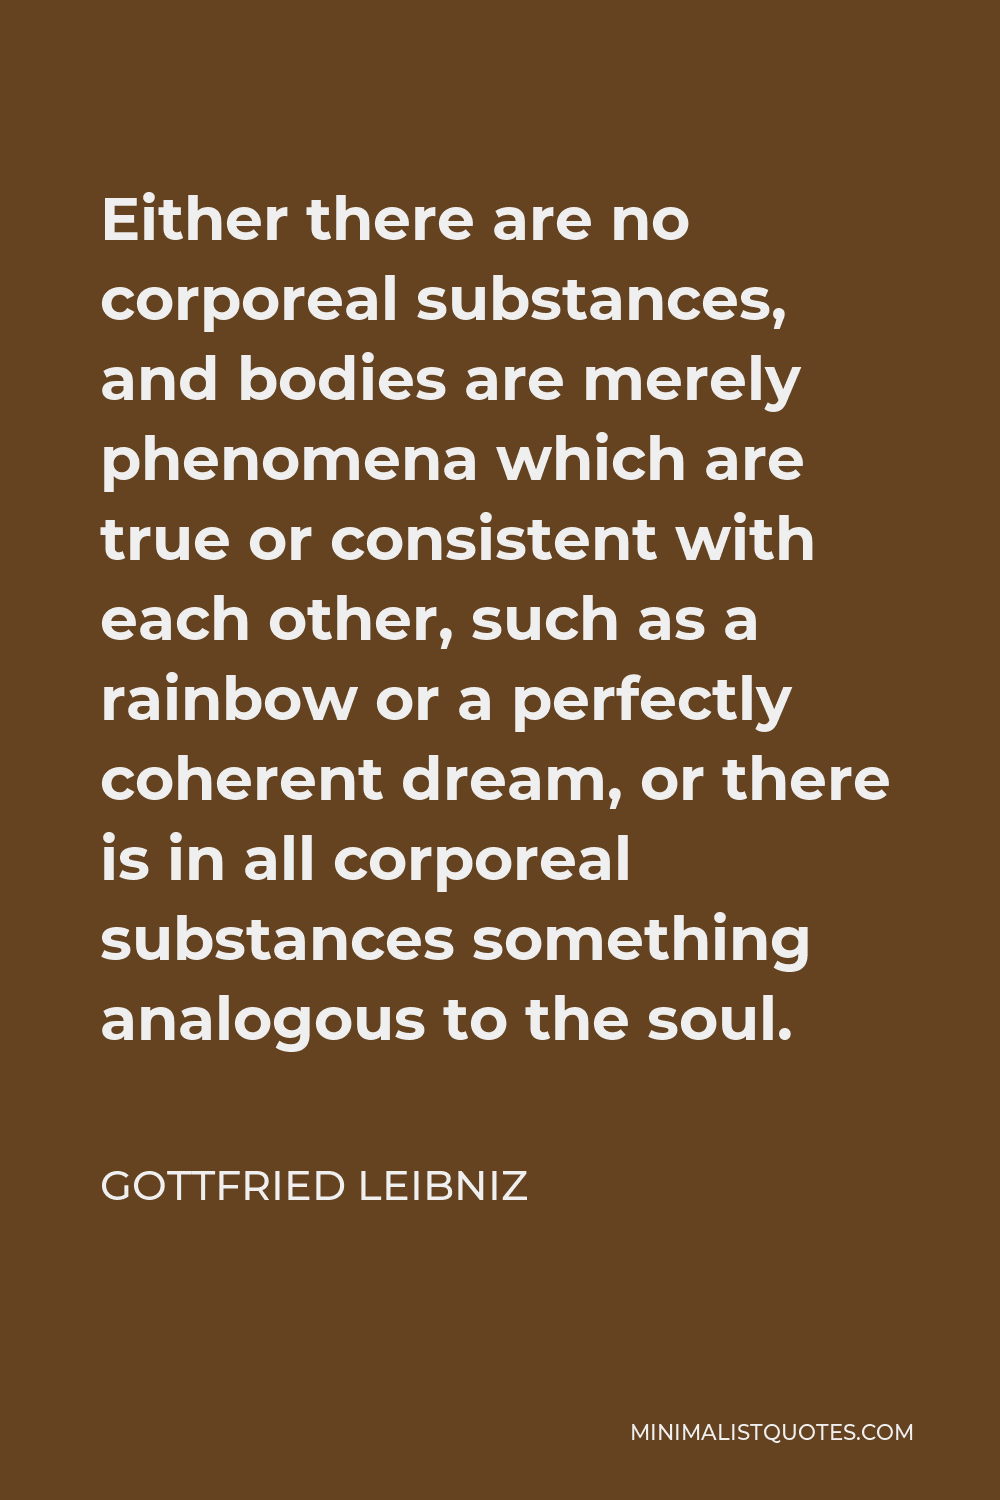 Gottfried Leibniz Quote - Either there are no corporeal substances, and bodies are merely phenomena which are true or consistent with each other, such as a rainbow or a perfectly coherent dream, or there is in all corporeal substances something analogous to the soul.